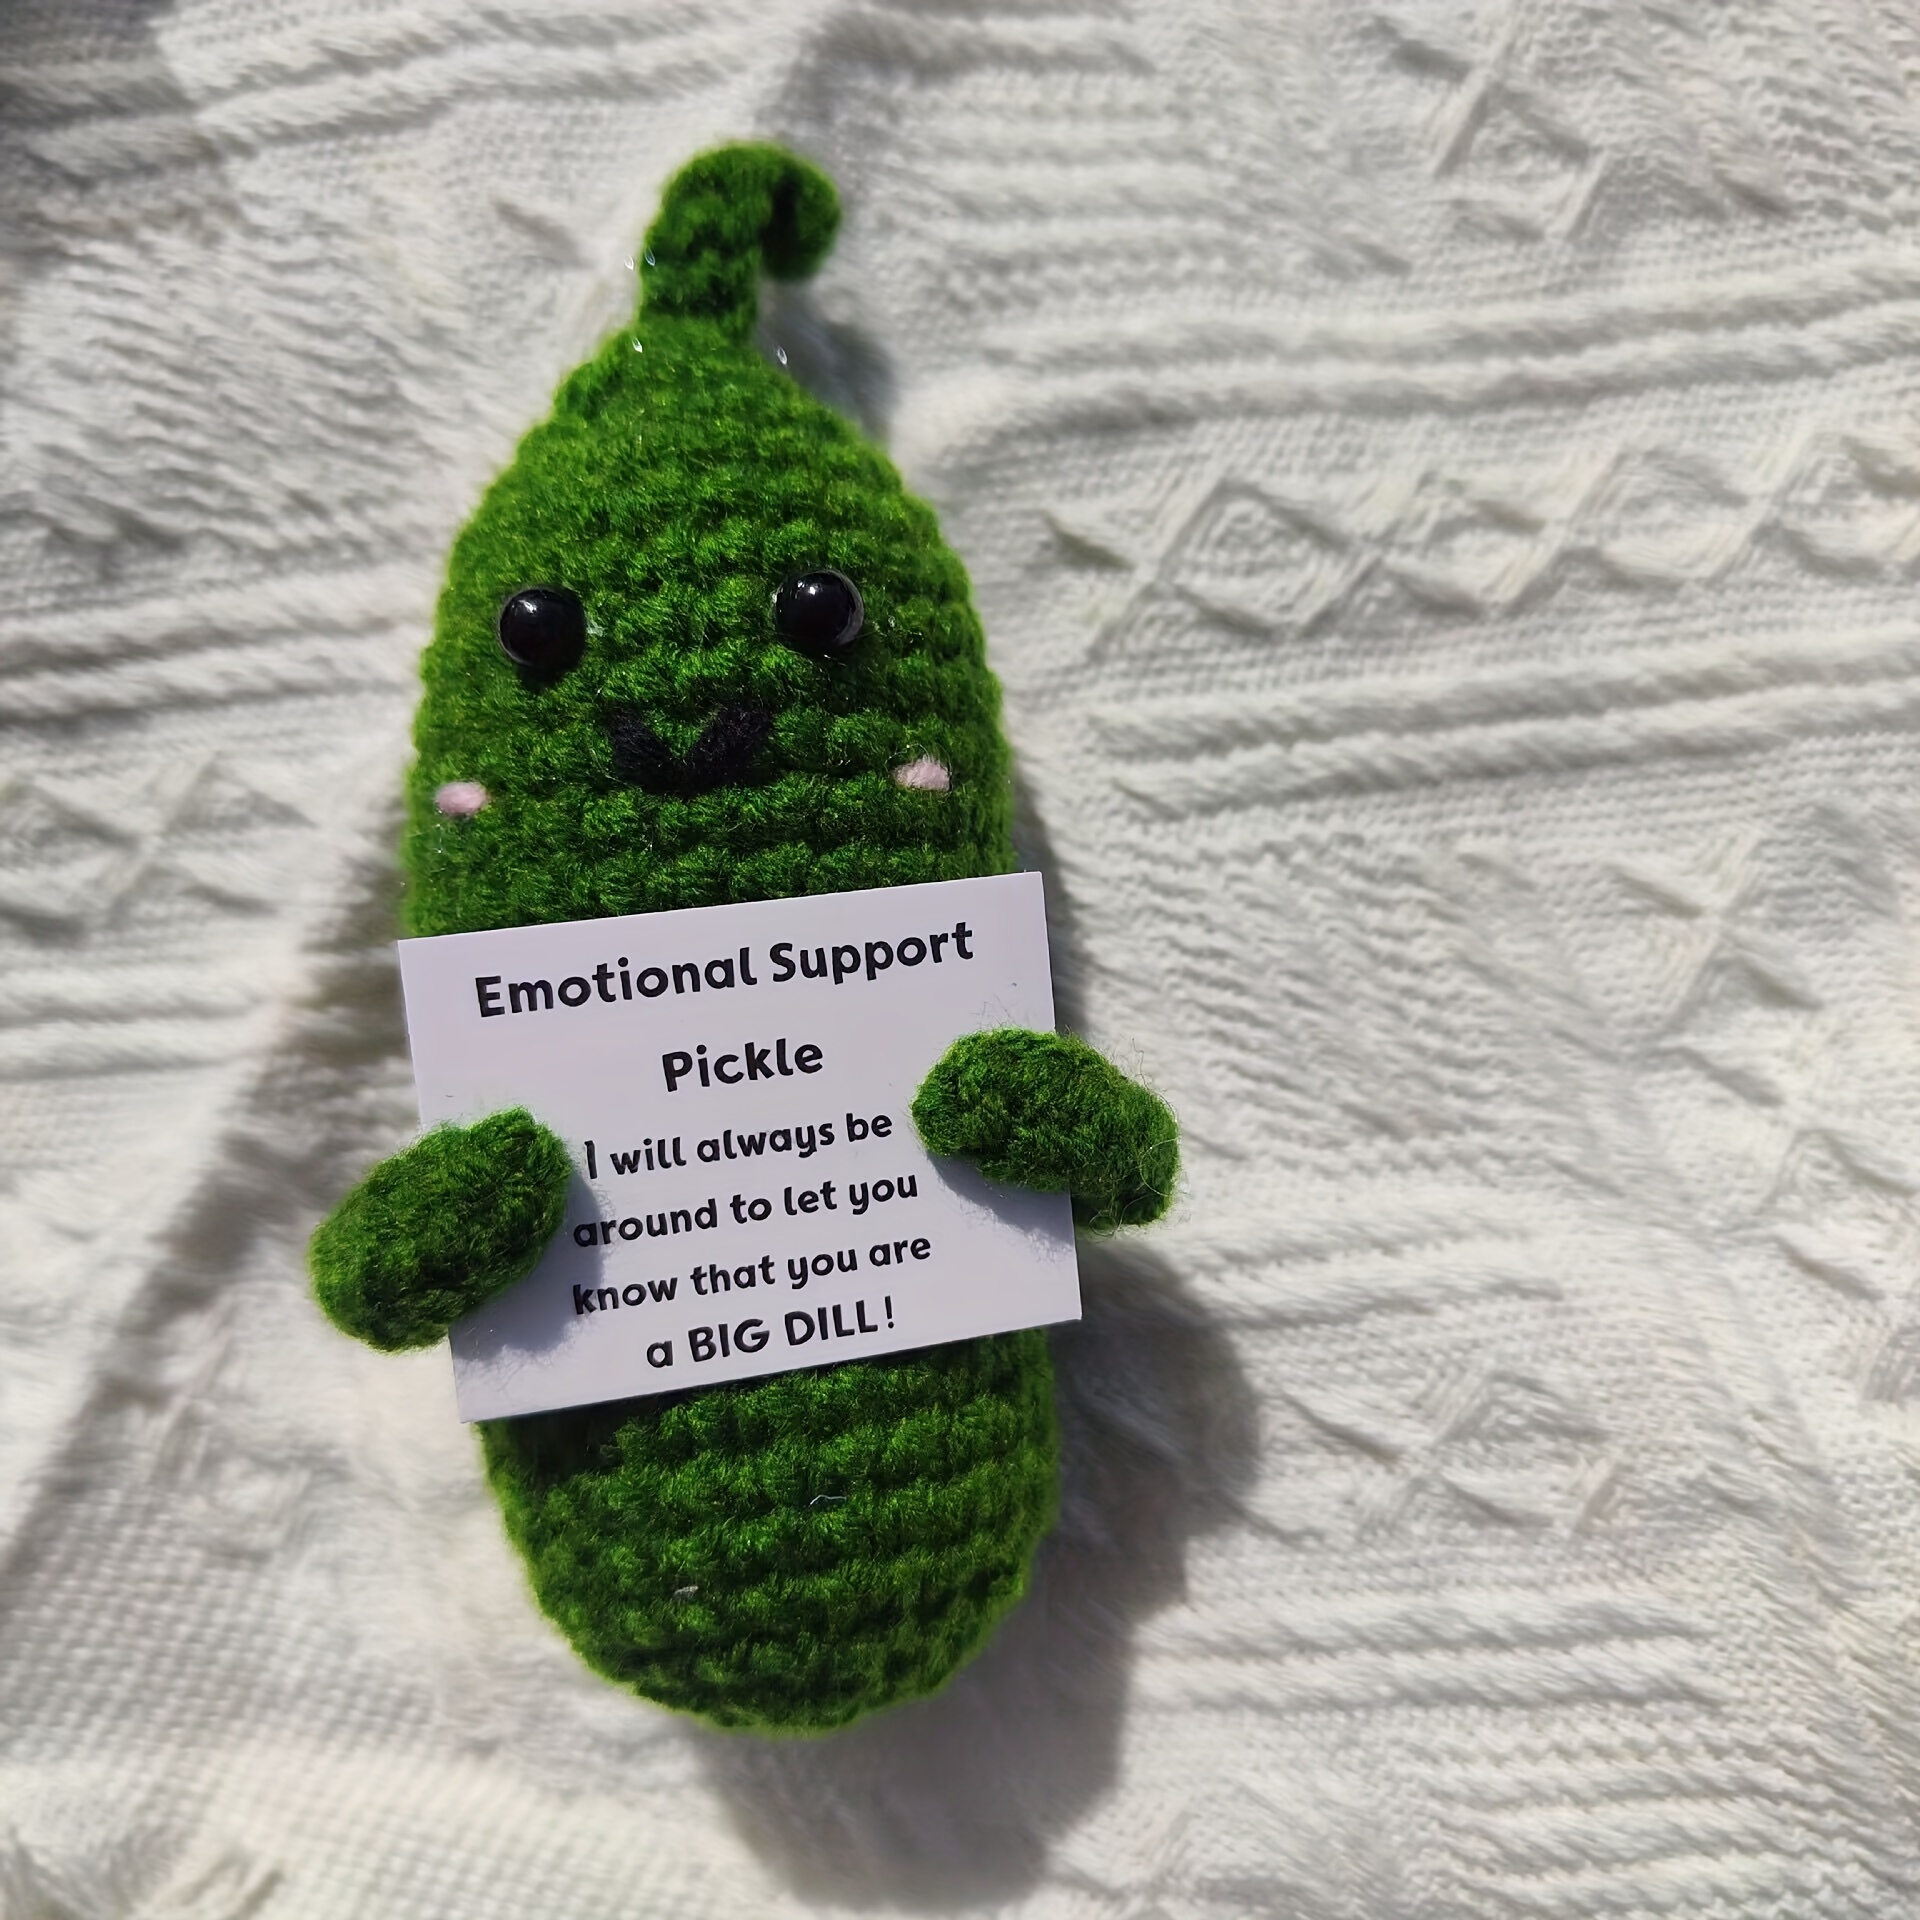 

1 Set Of Handmade Emotional Support Pickles Potato Tomato Lemon Gift, Handmade Emotional Support Pickles, Cute Crocheted Pickle Doll, Christmas Pickles Decorative Gift